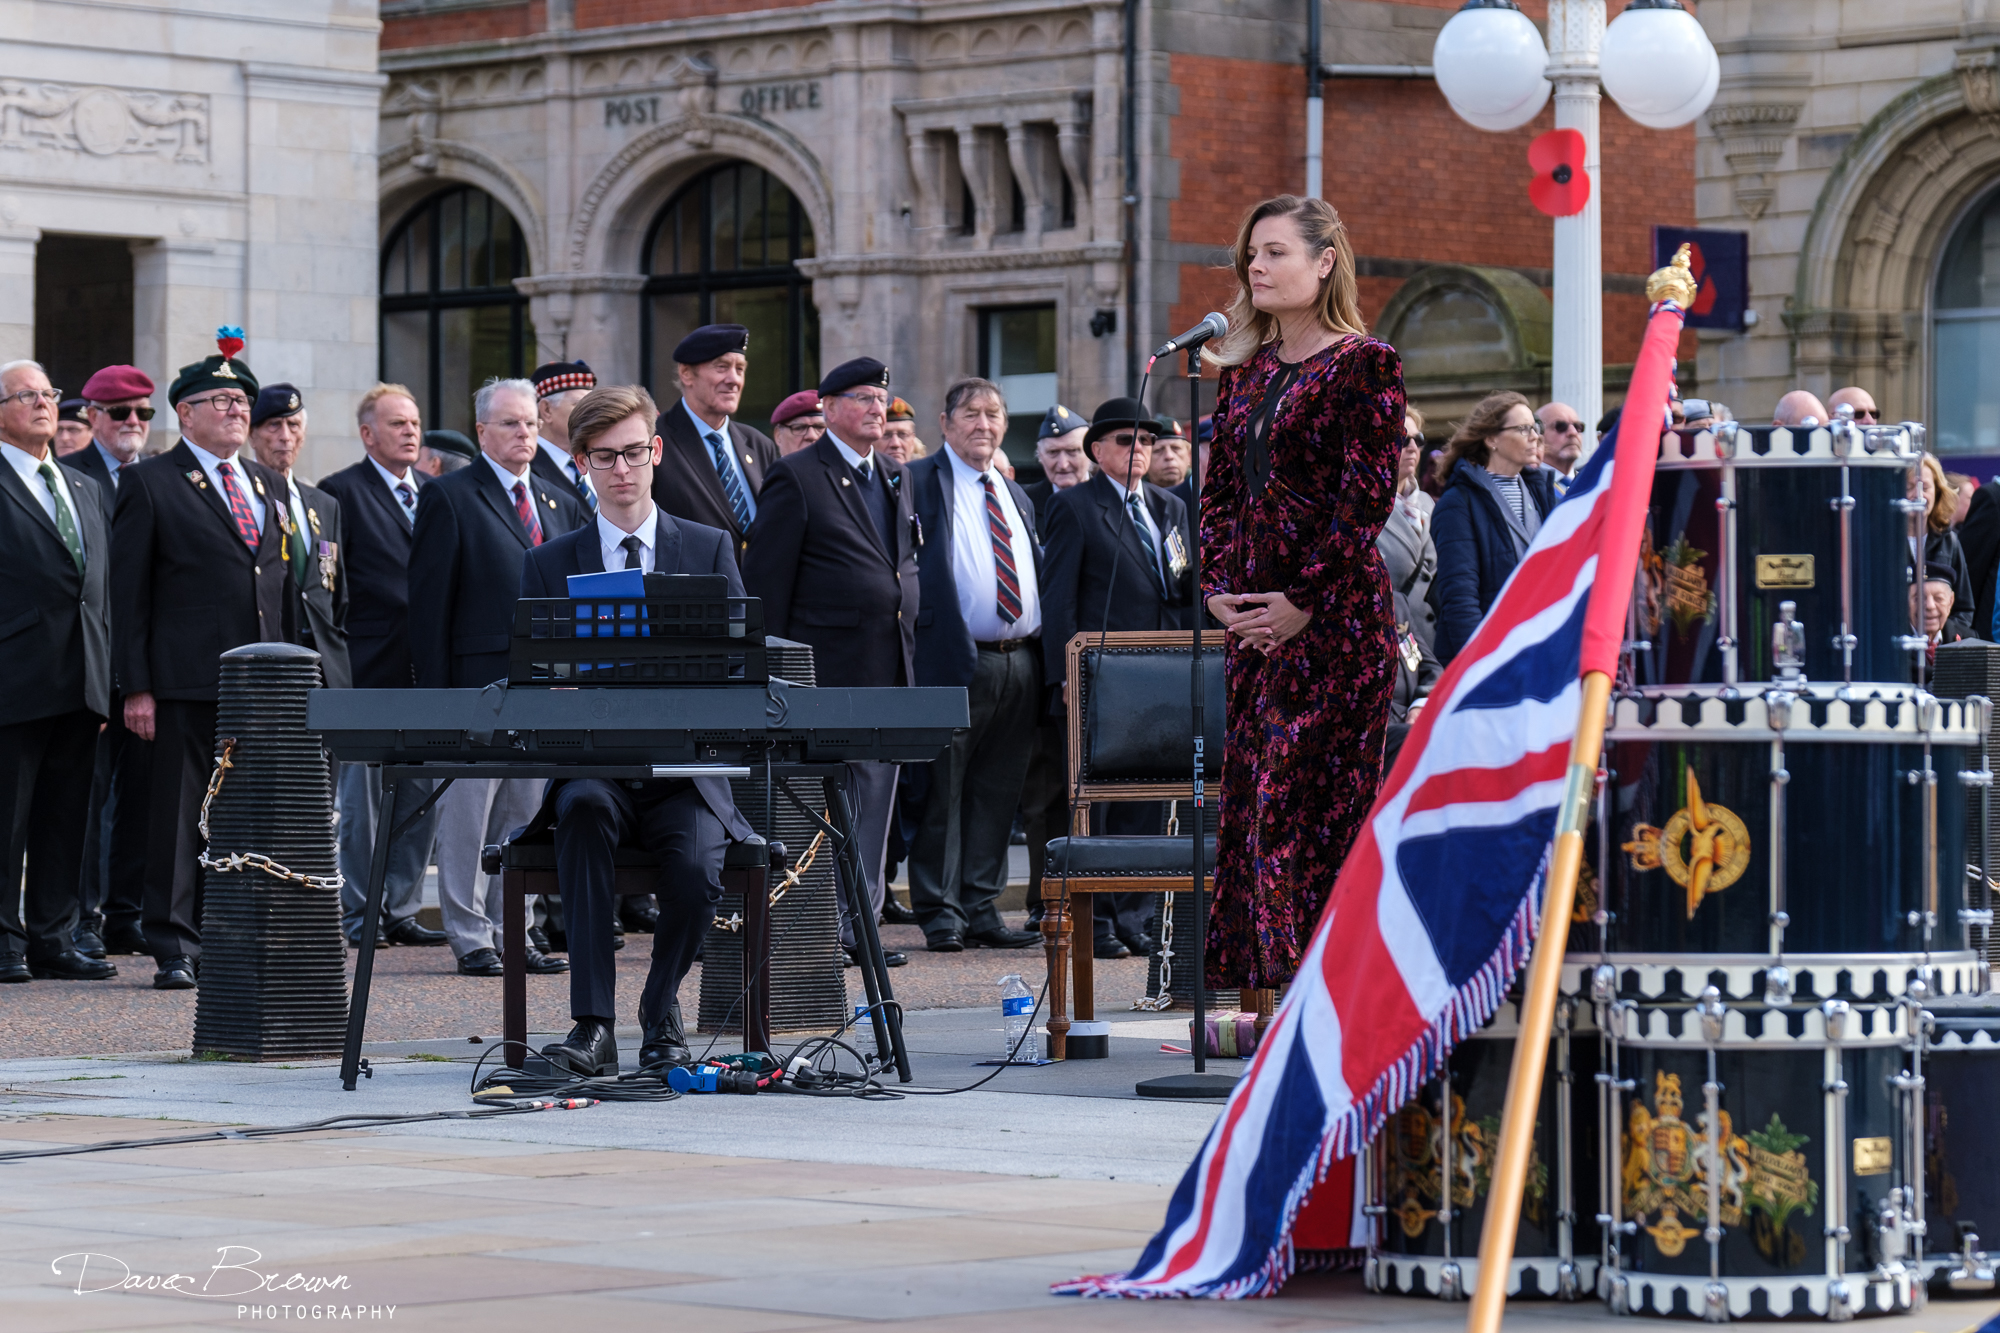 Princess Anne visited Southport to lead the centenary re-dedication of Southport War Memorial. Sarah McEntee performed for the crowds. Photo by Dave Brown Photography 